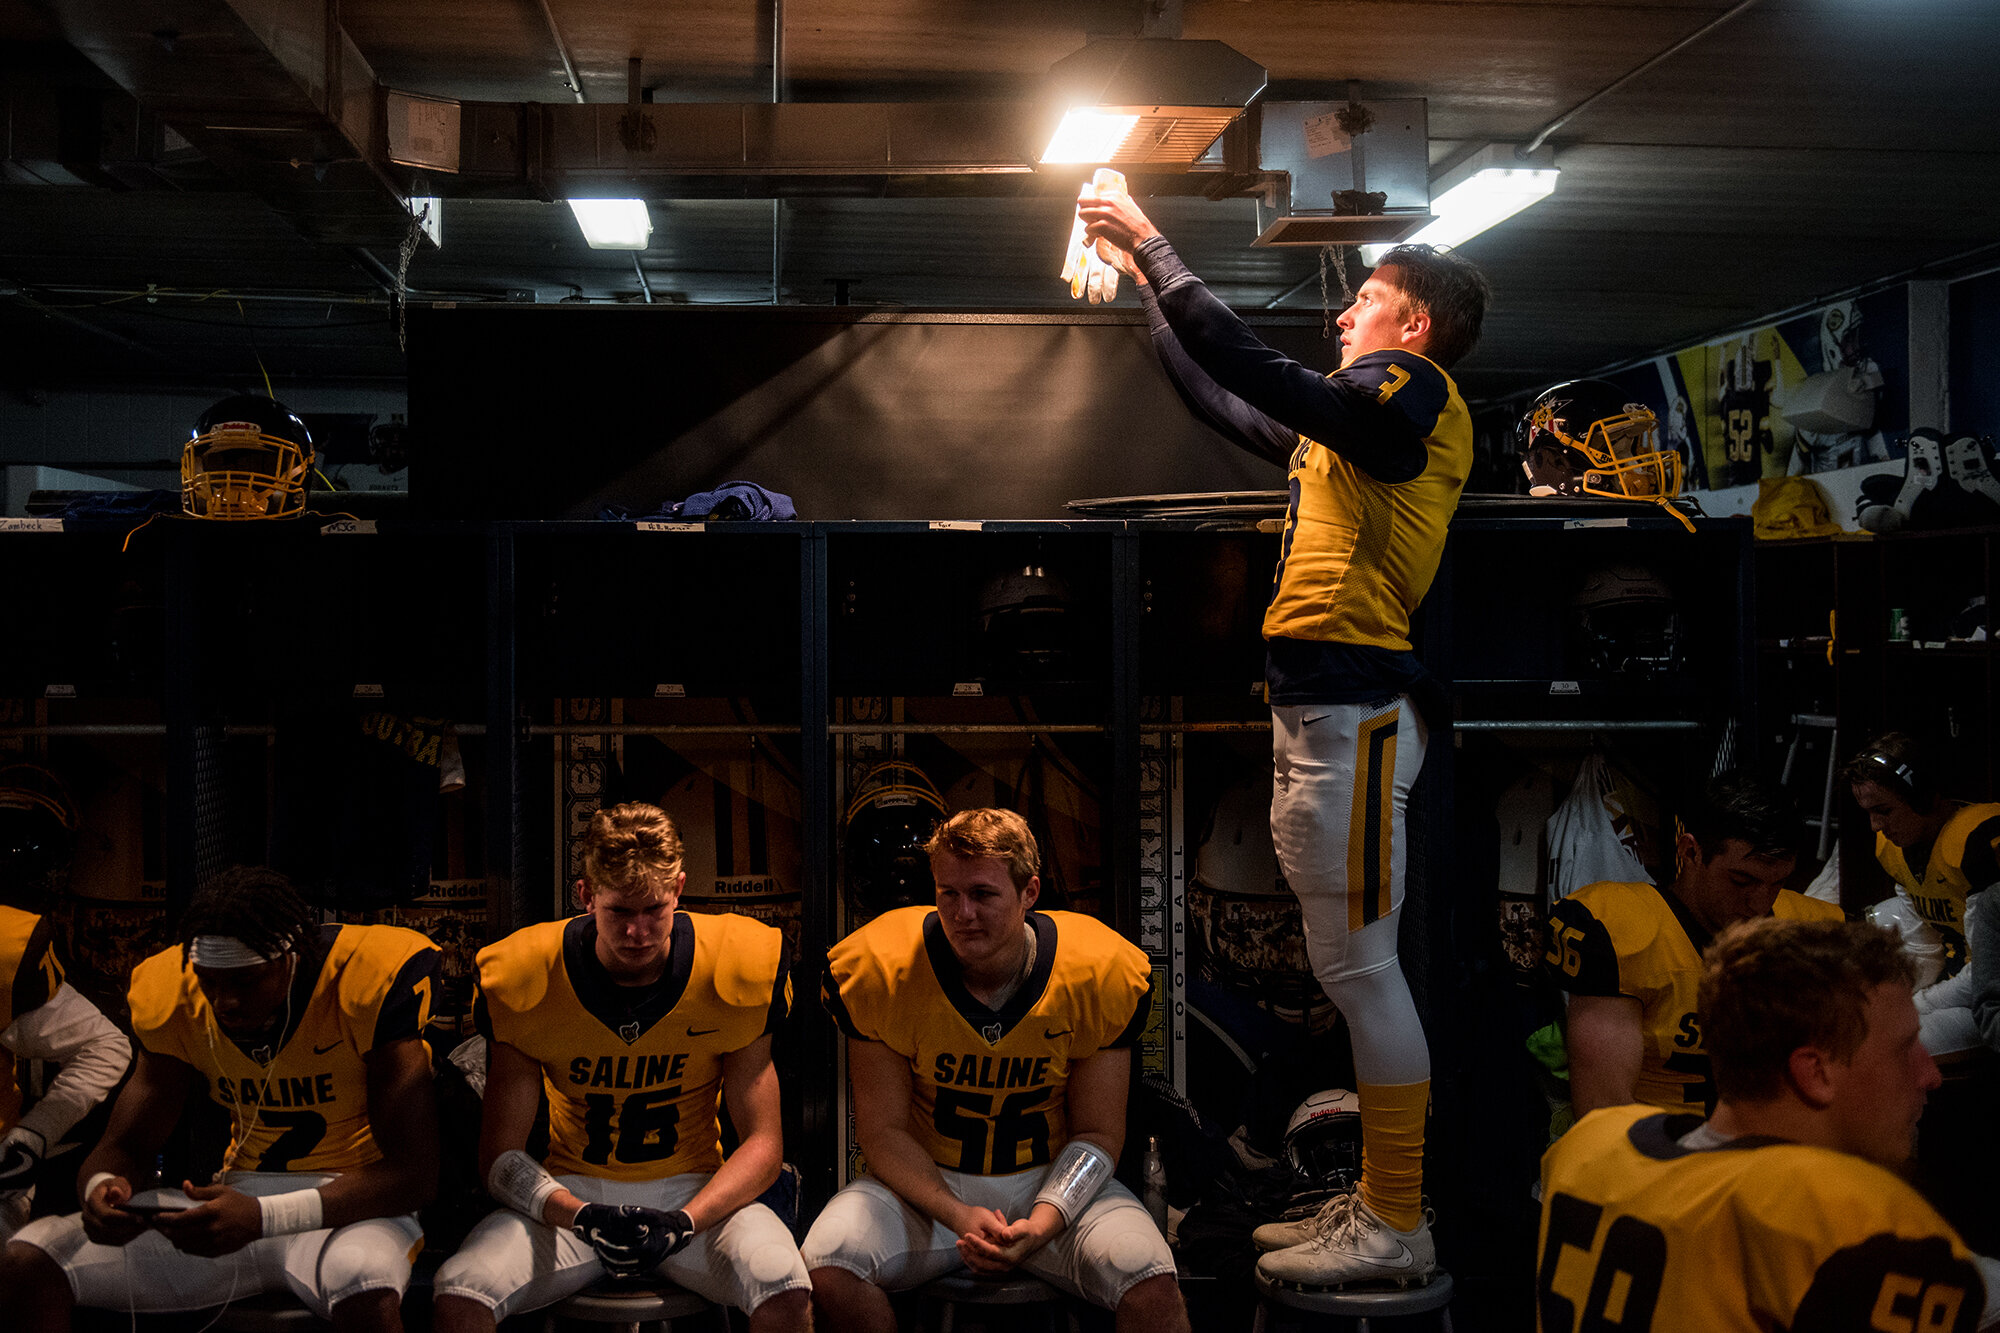  Saline’s Lucas Ebert, right, warms his gloves in the locker room before the high school football game between Saline and Monroe, Friday, Oct. 12, 2018 in Saline, Michigan. 